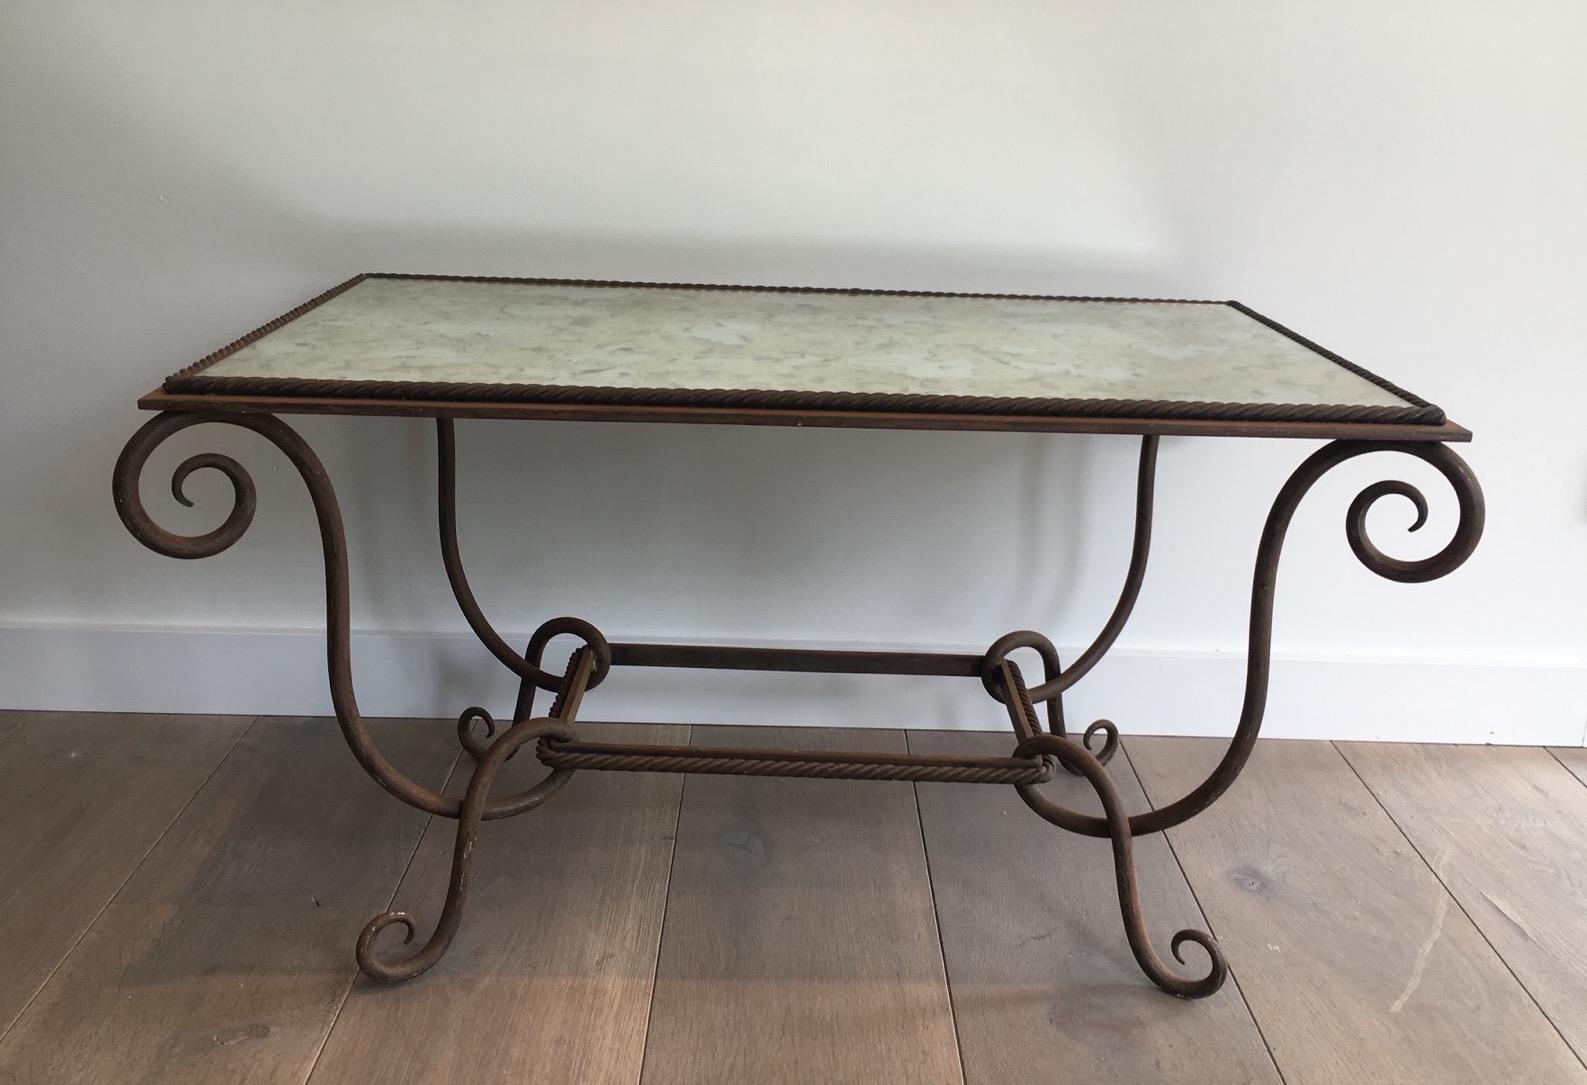 This unusual coffee table from 1940s is made of wrought and hammered iron. It has a faux-antique mirror on top which is new and has been remade in the style of the old mercury mirrors. This coffee table is a French work typical from the famous